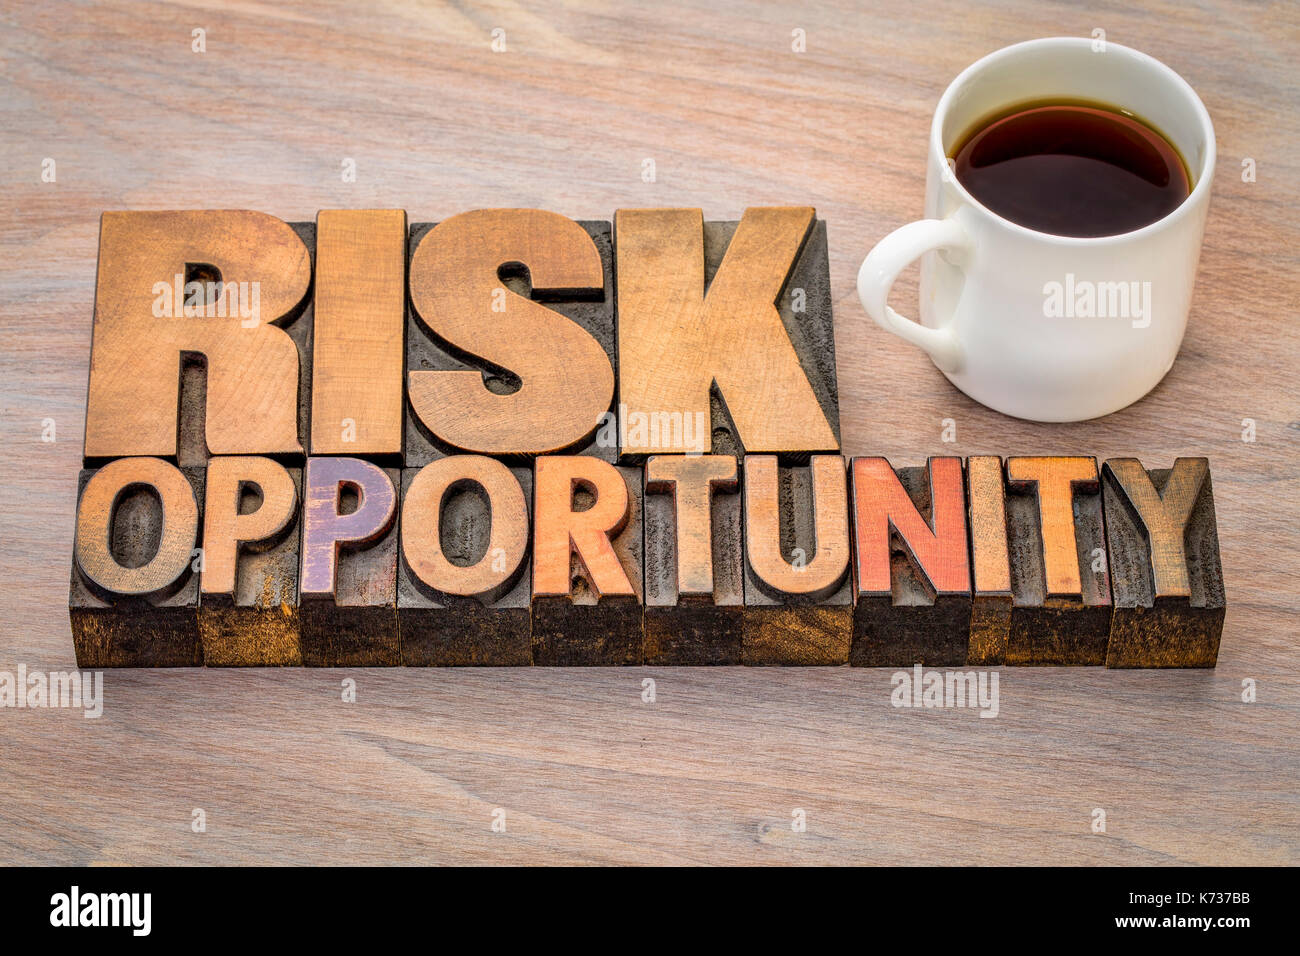 risk and opportunity word abstract in vintage letterpress wood type with a cup of coffee Stock Photo